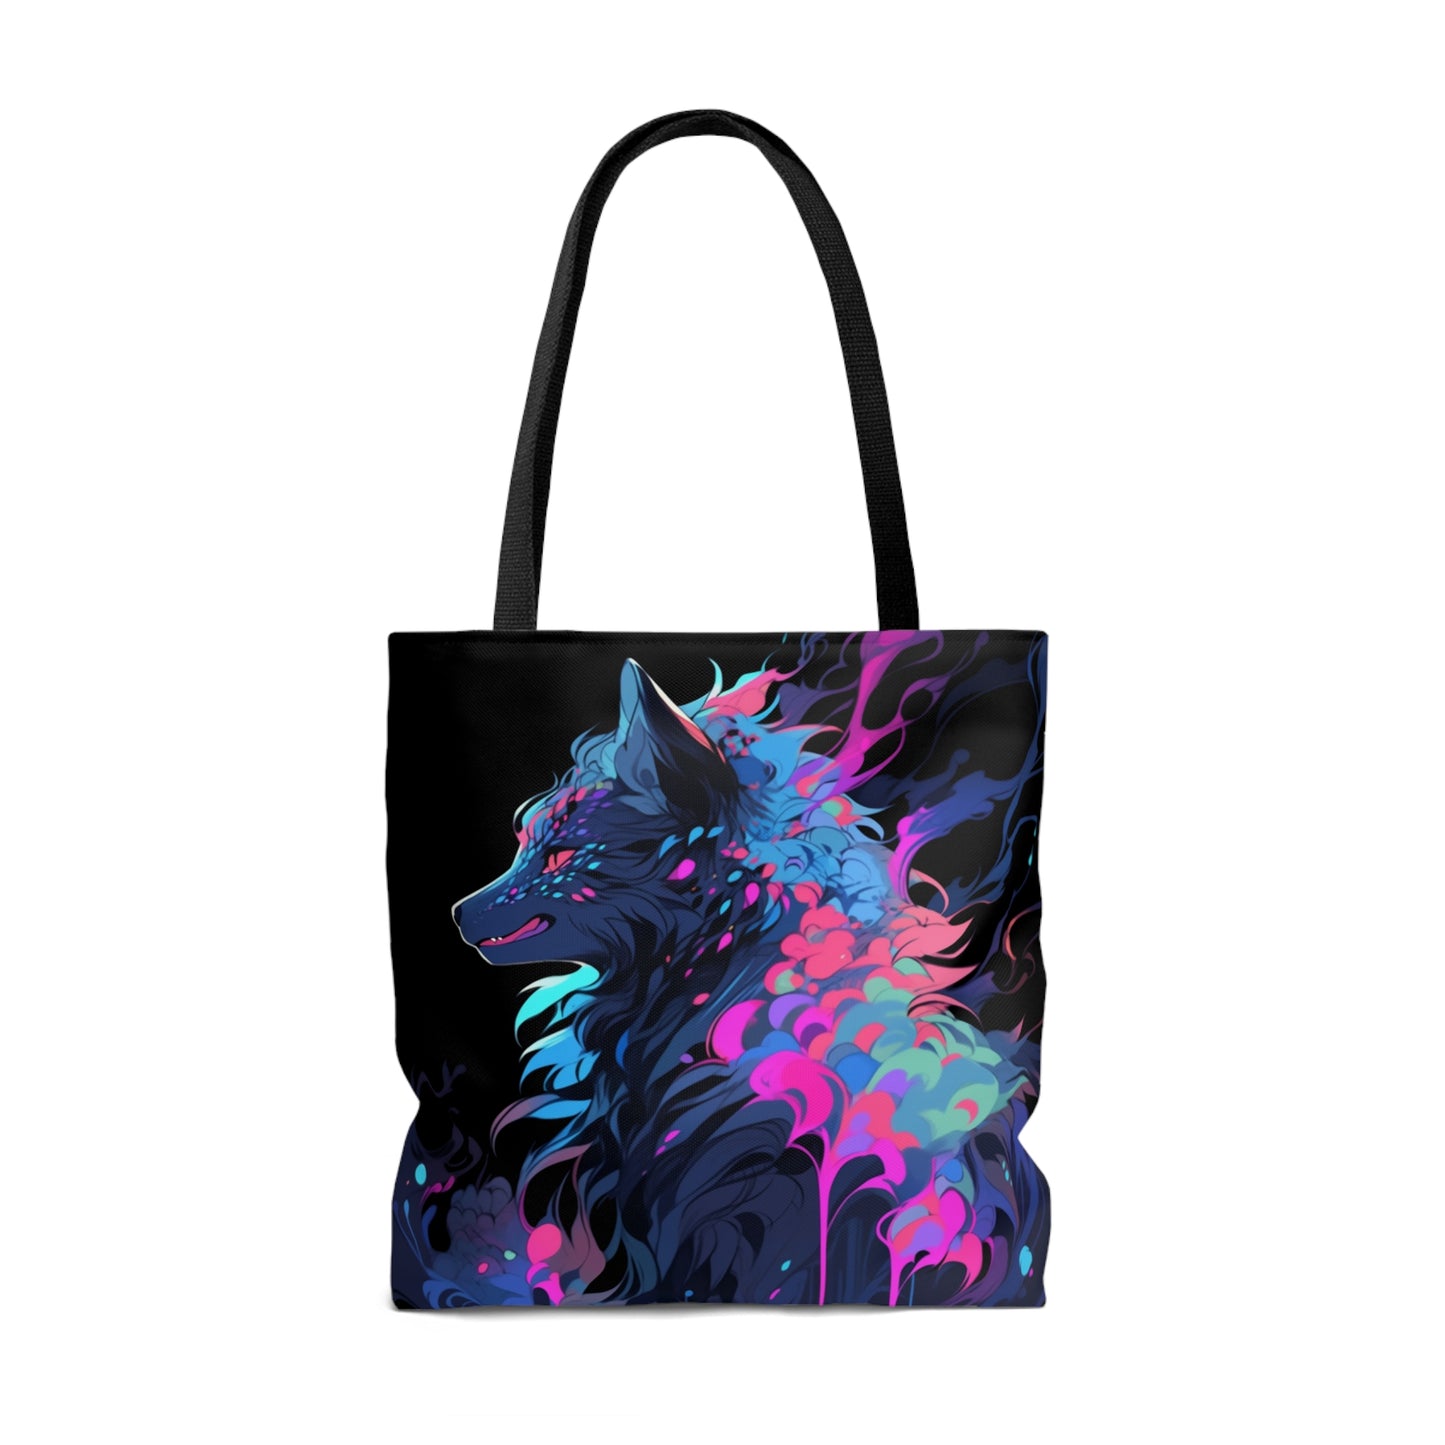 Midnight Wolf - Tote Bag